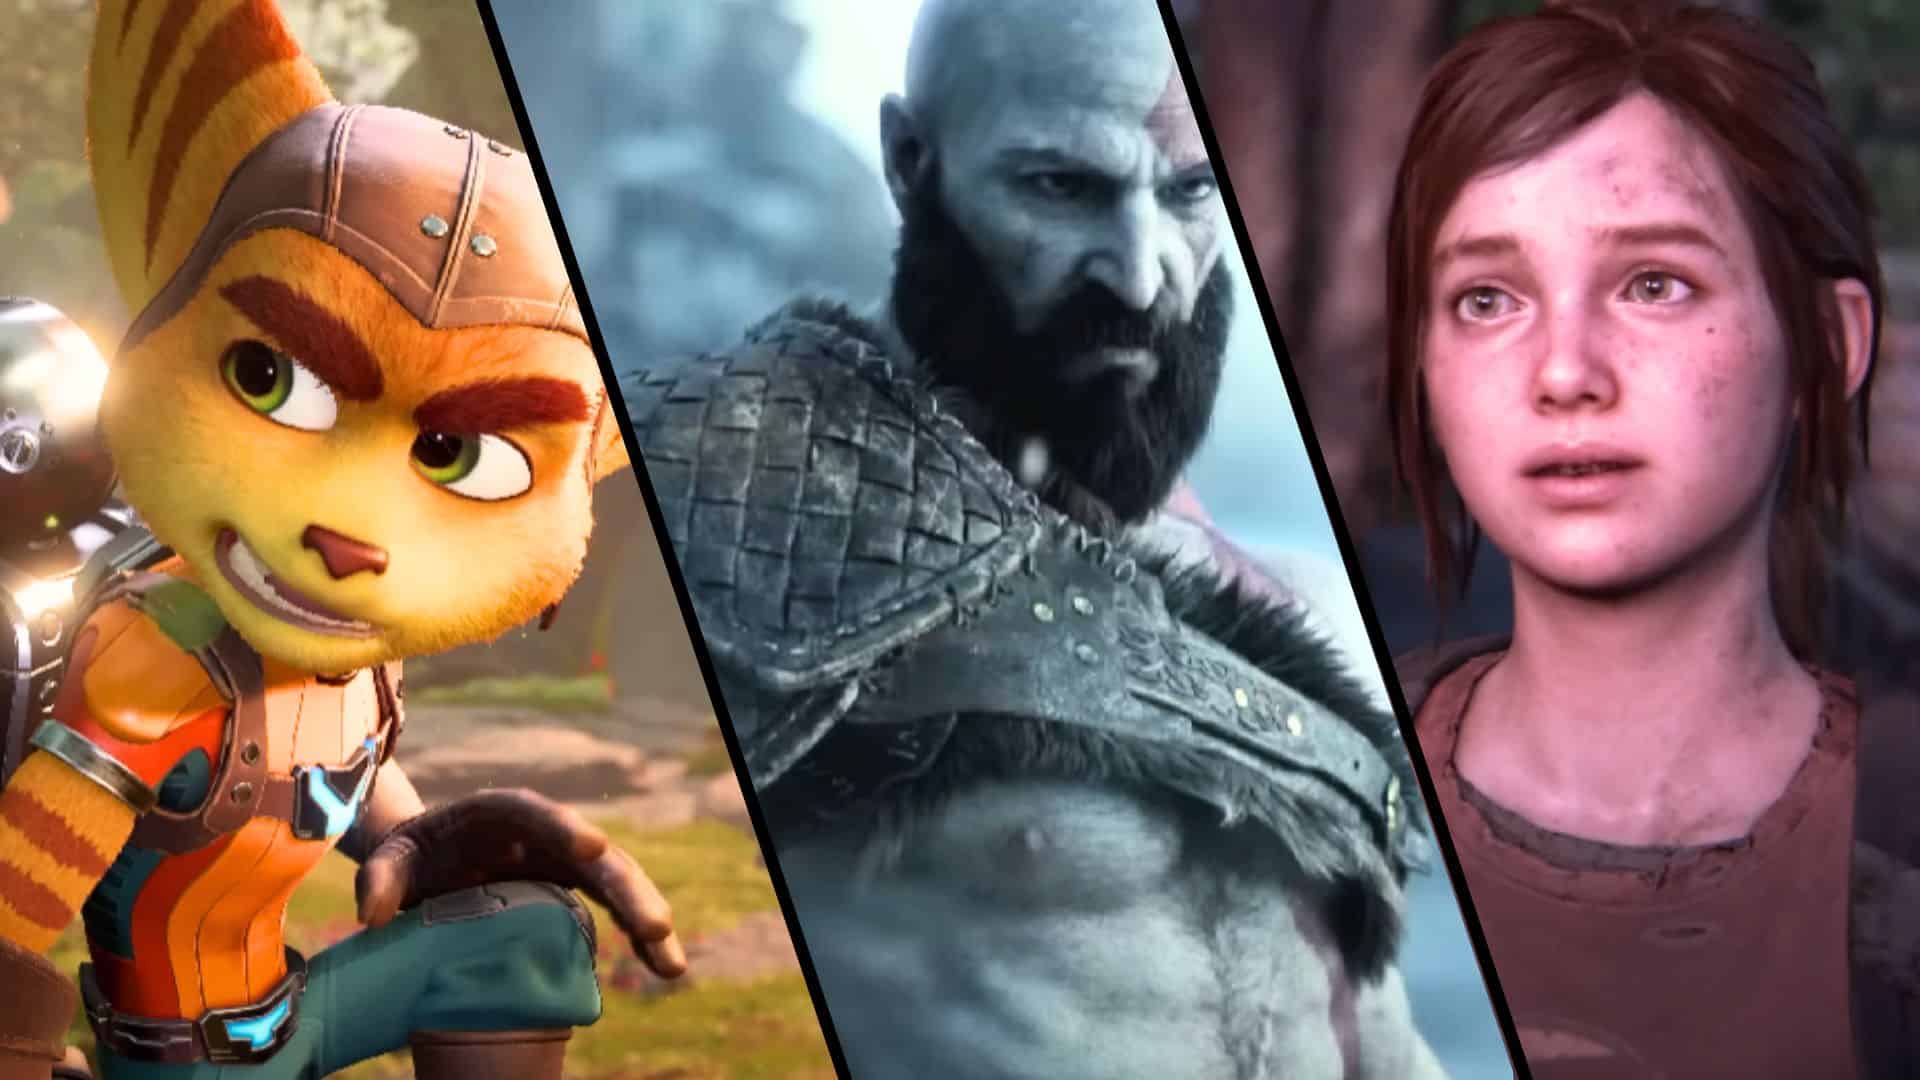 Ratchet and Clank next to Kratos next to Ellie